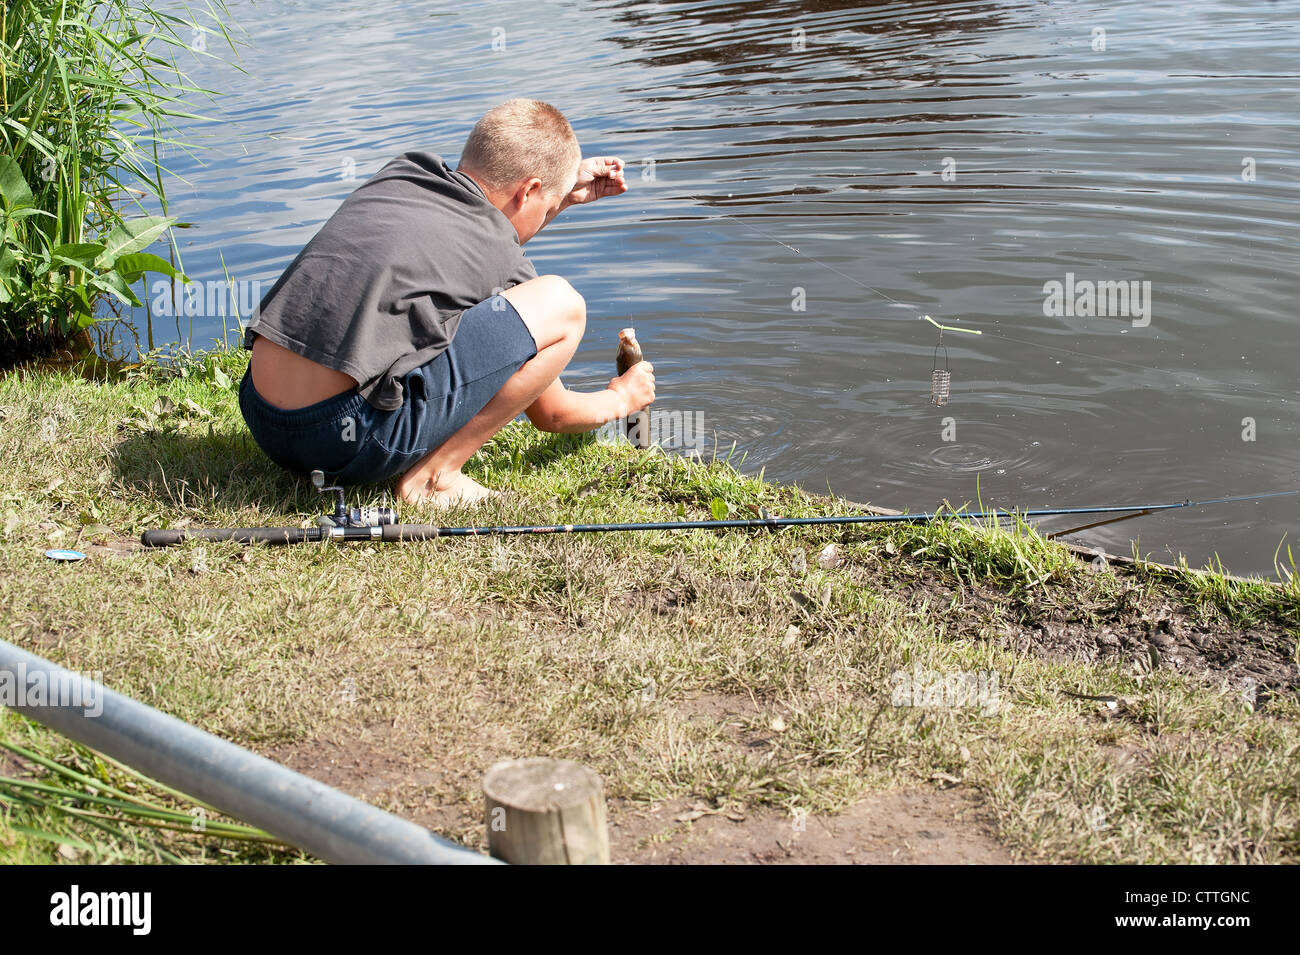 Fisherman catches a beautiful silver fish in river Stock Photo